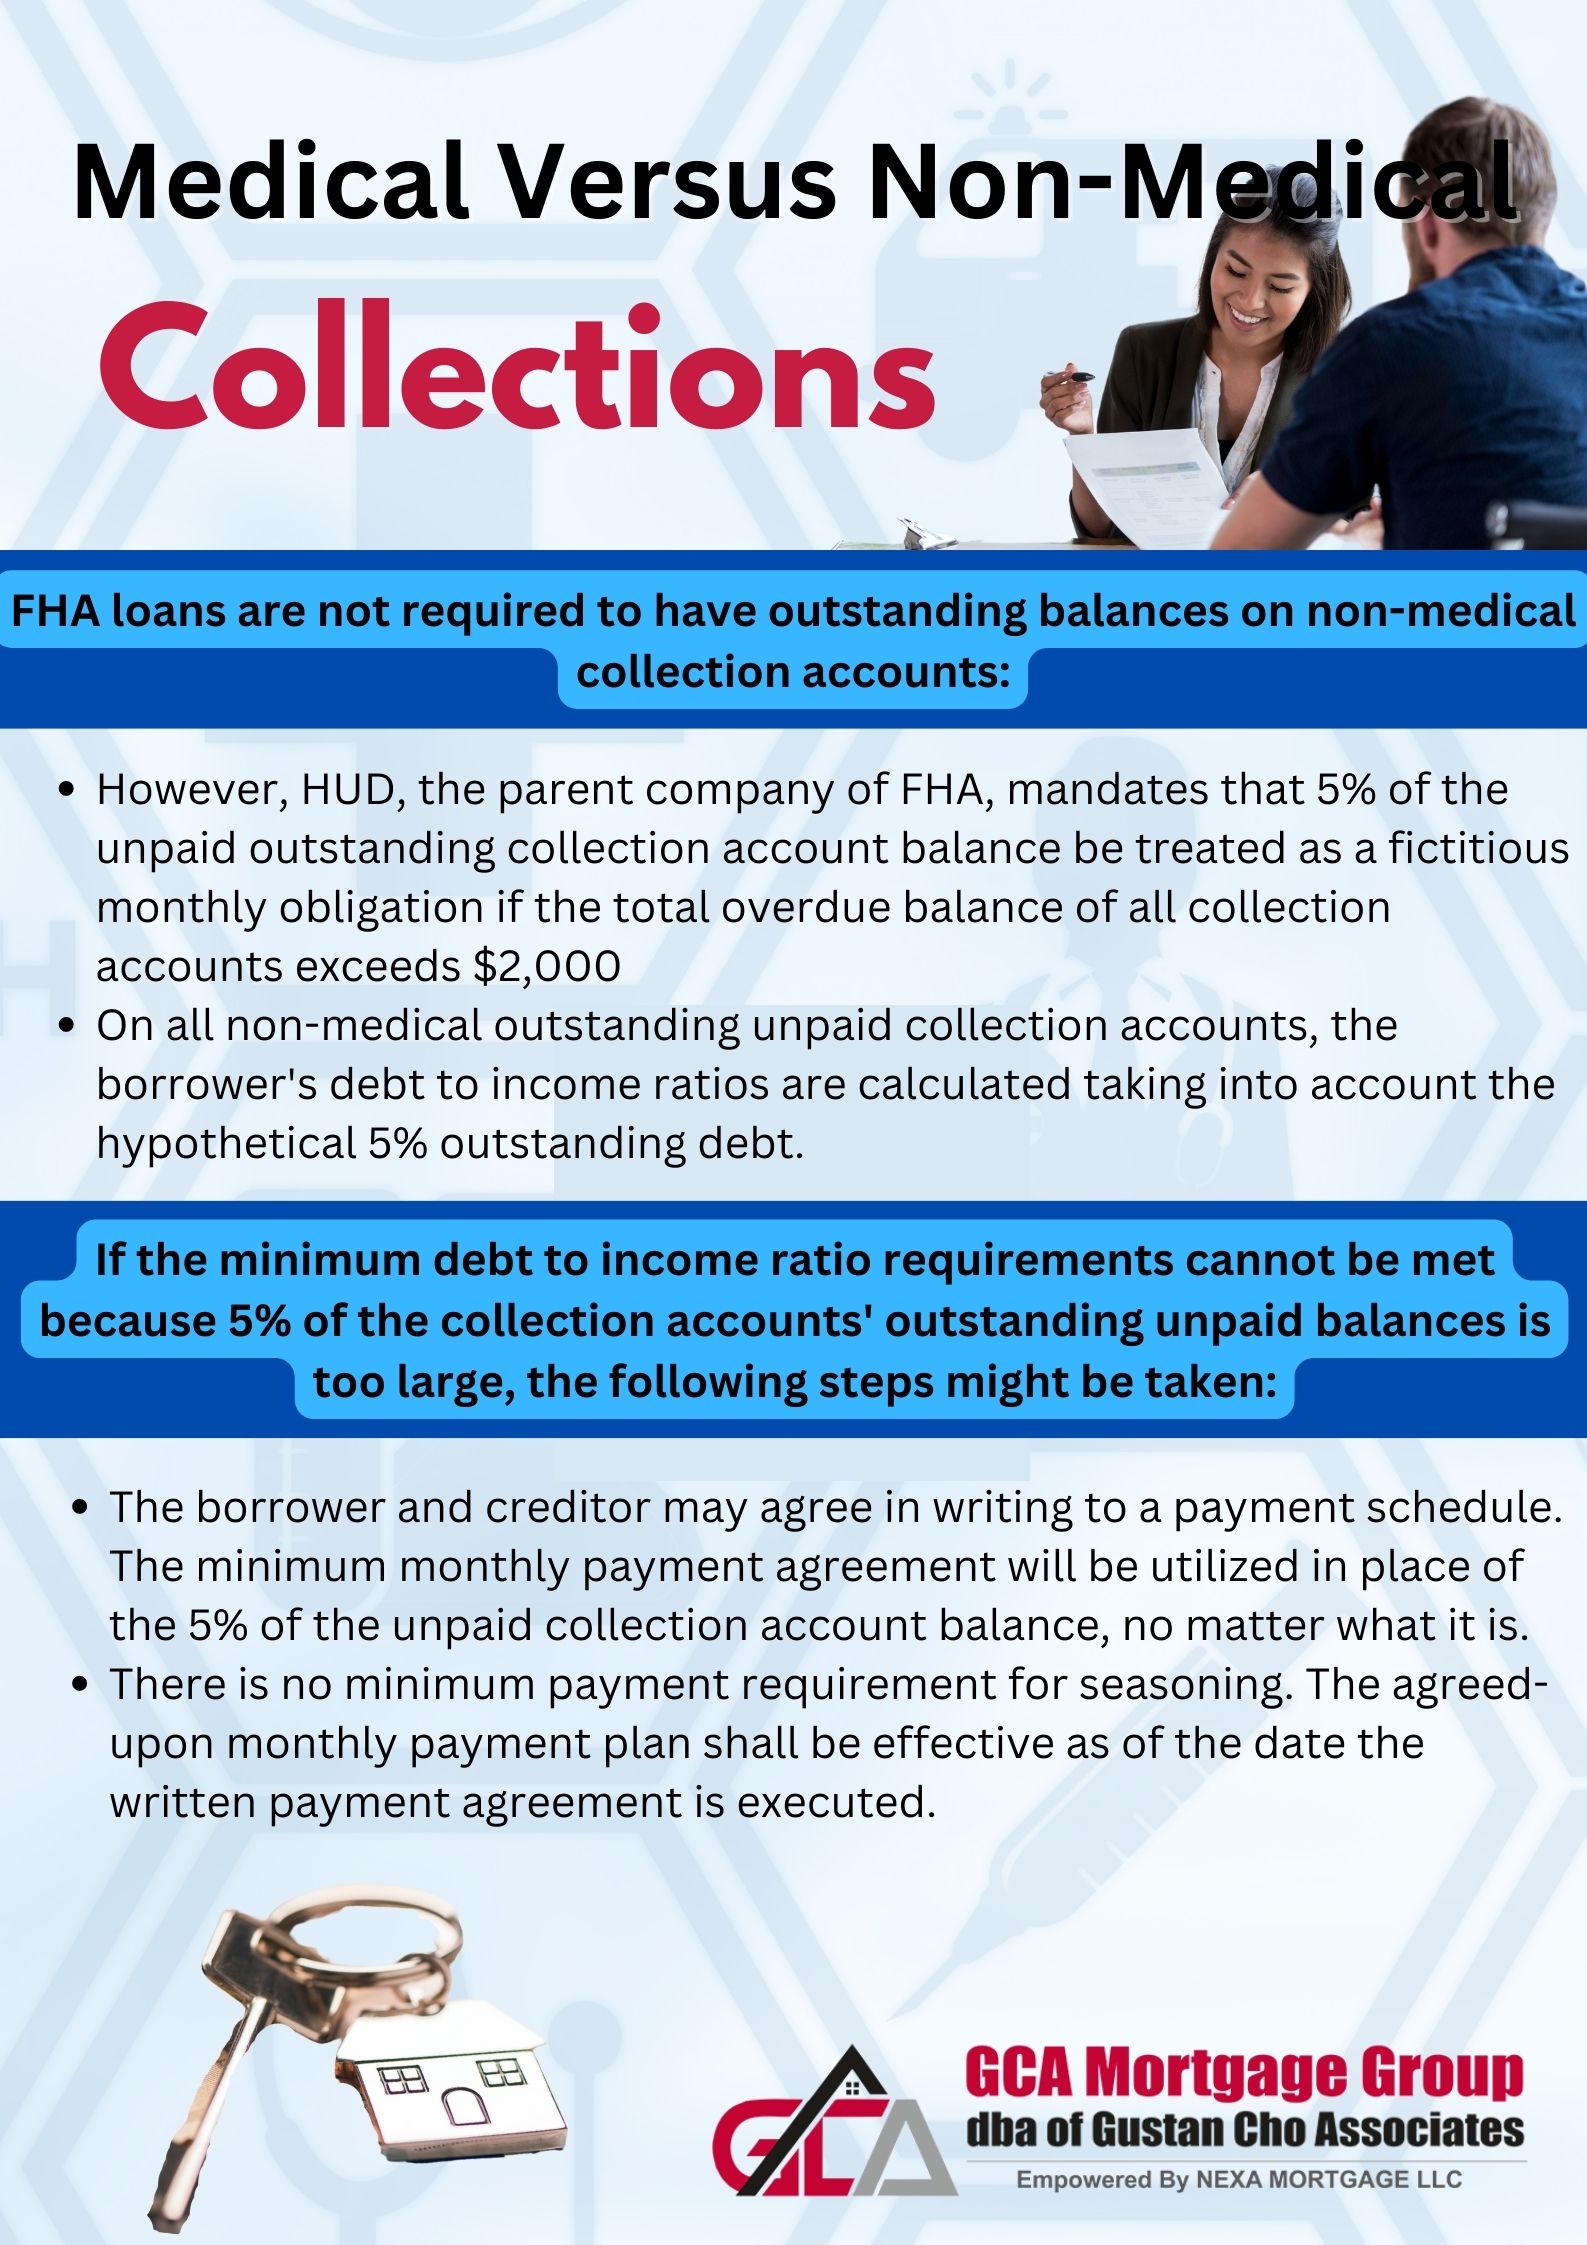 Medical Versus Non-Medical Collections (2)